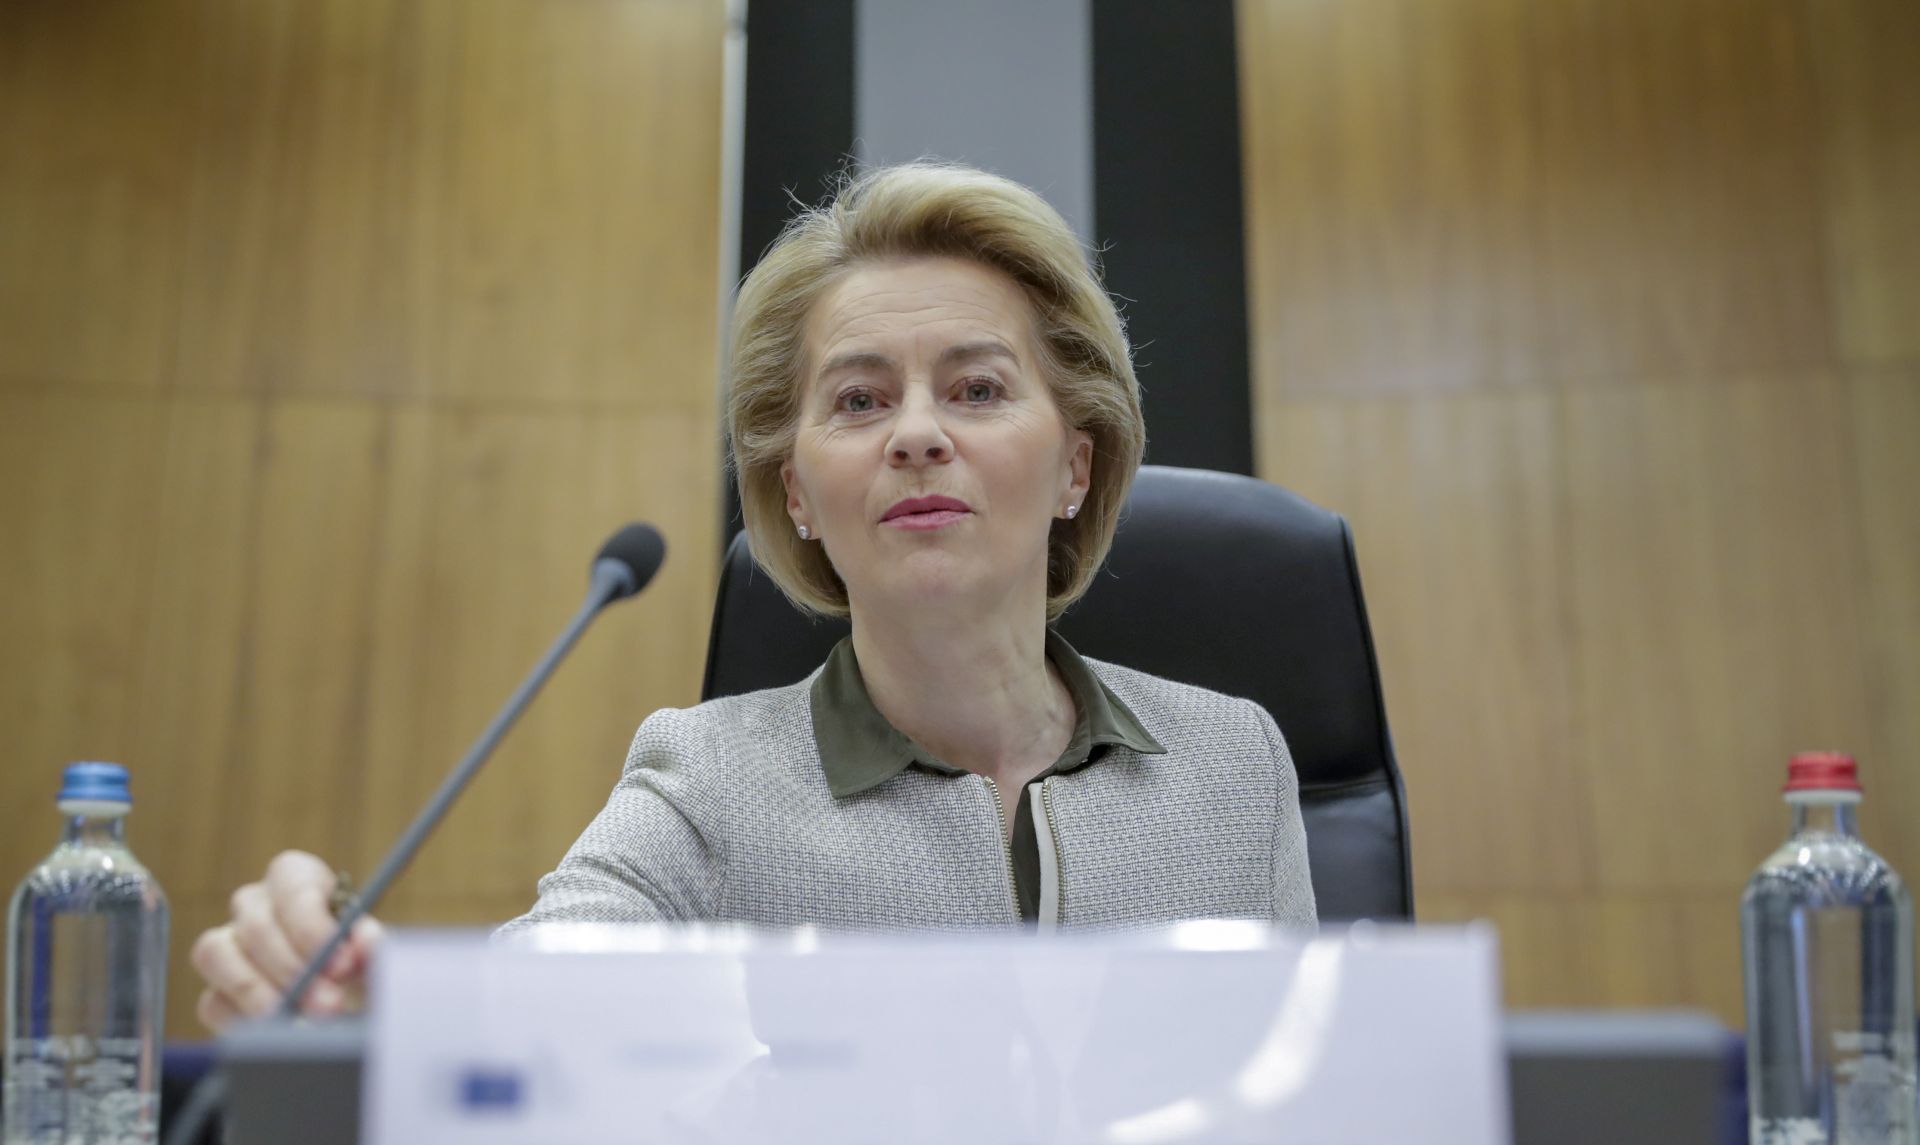 epa08248415 European Union (EU) Commission President Ursula Von der Leyen during the weekly college meeting of the European Commission in Brussels, Belgium, 26 February 2020.  EPA/OLIVIER HOSLET